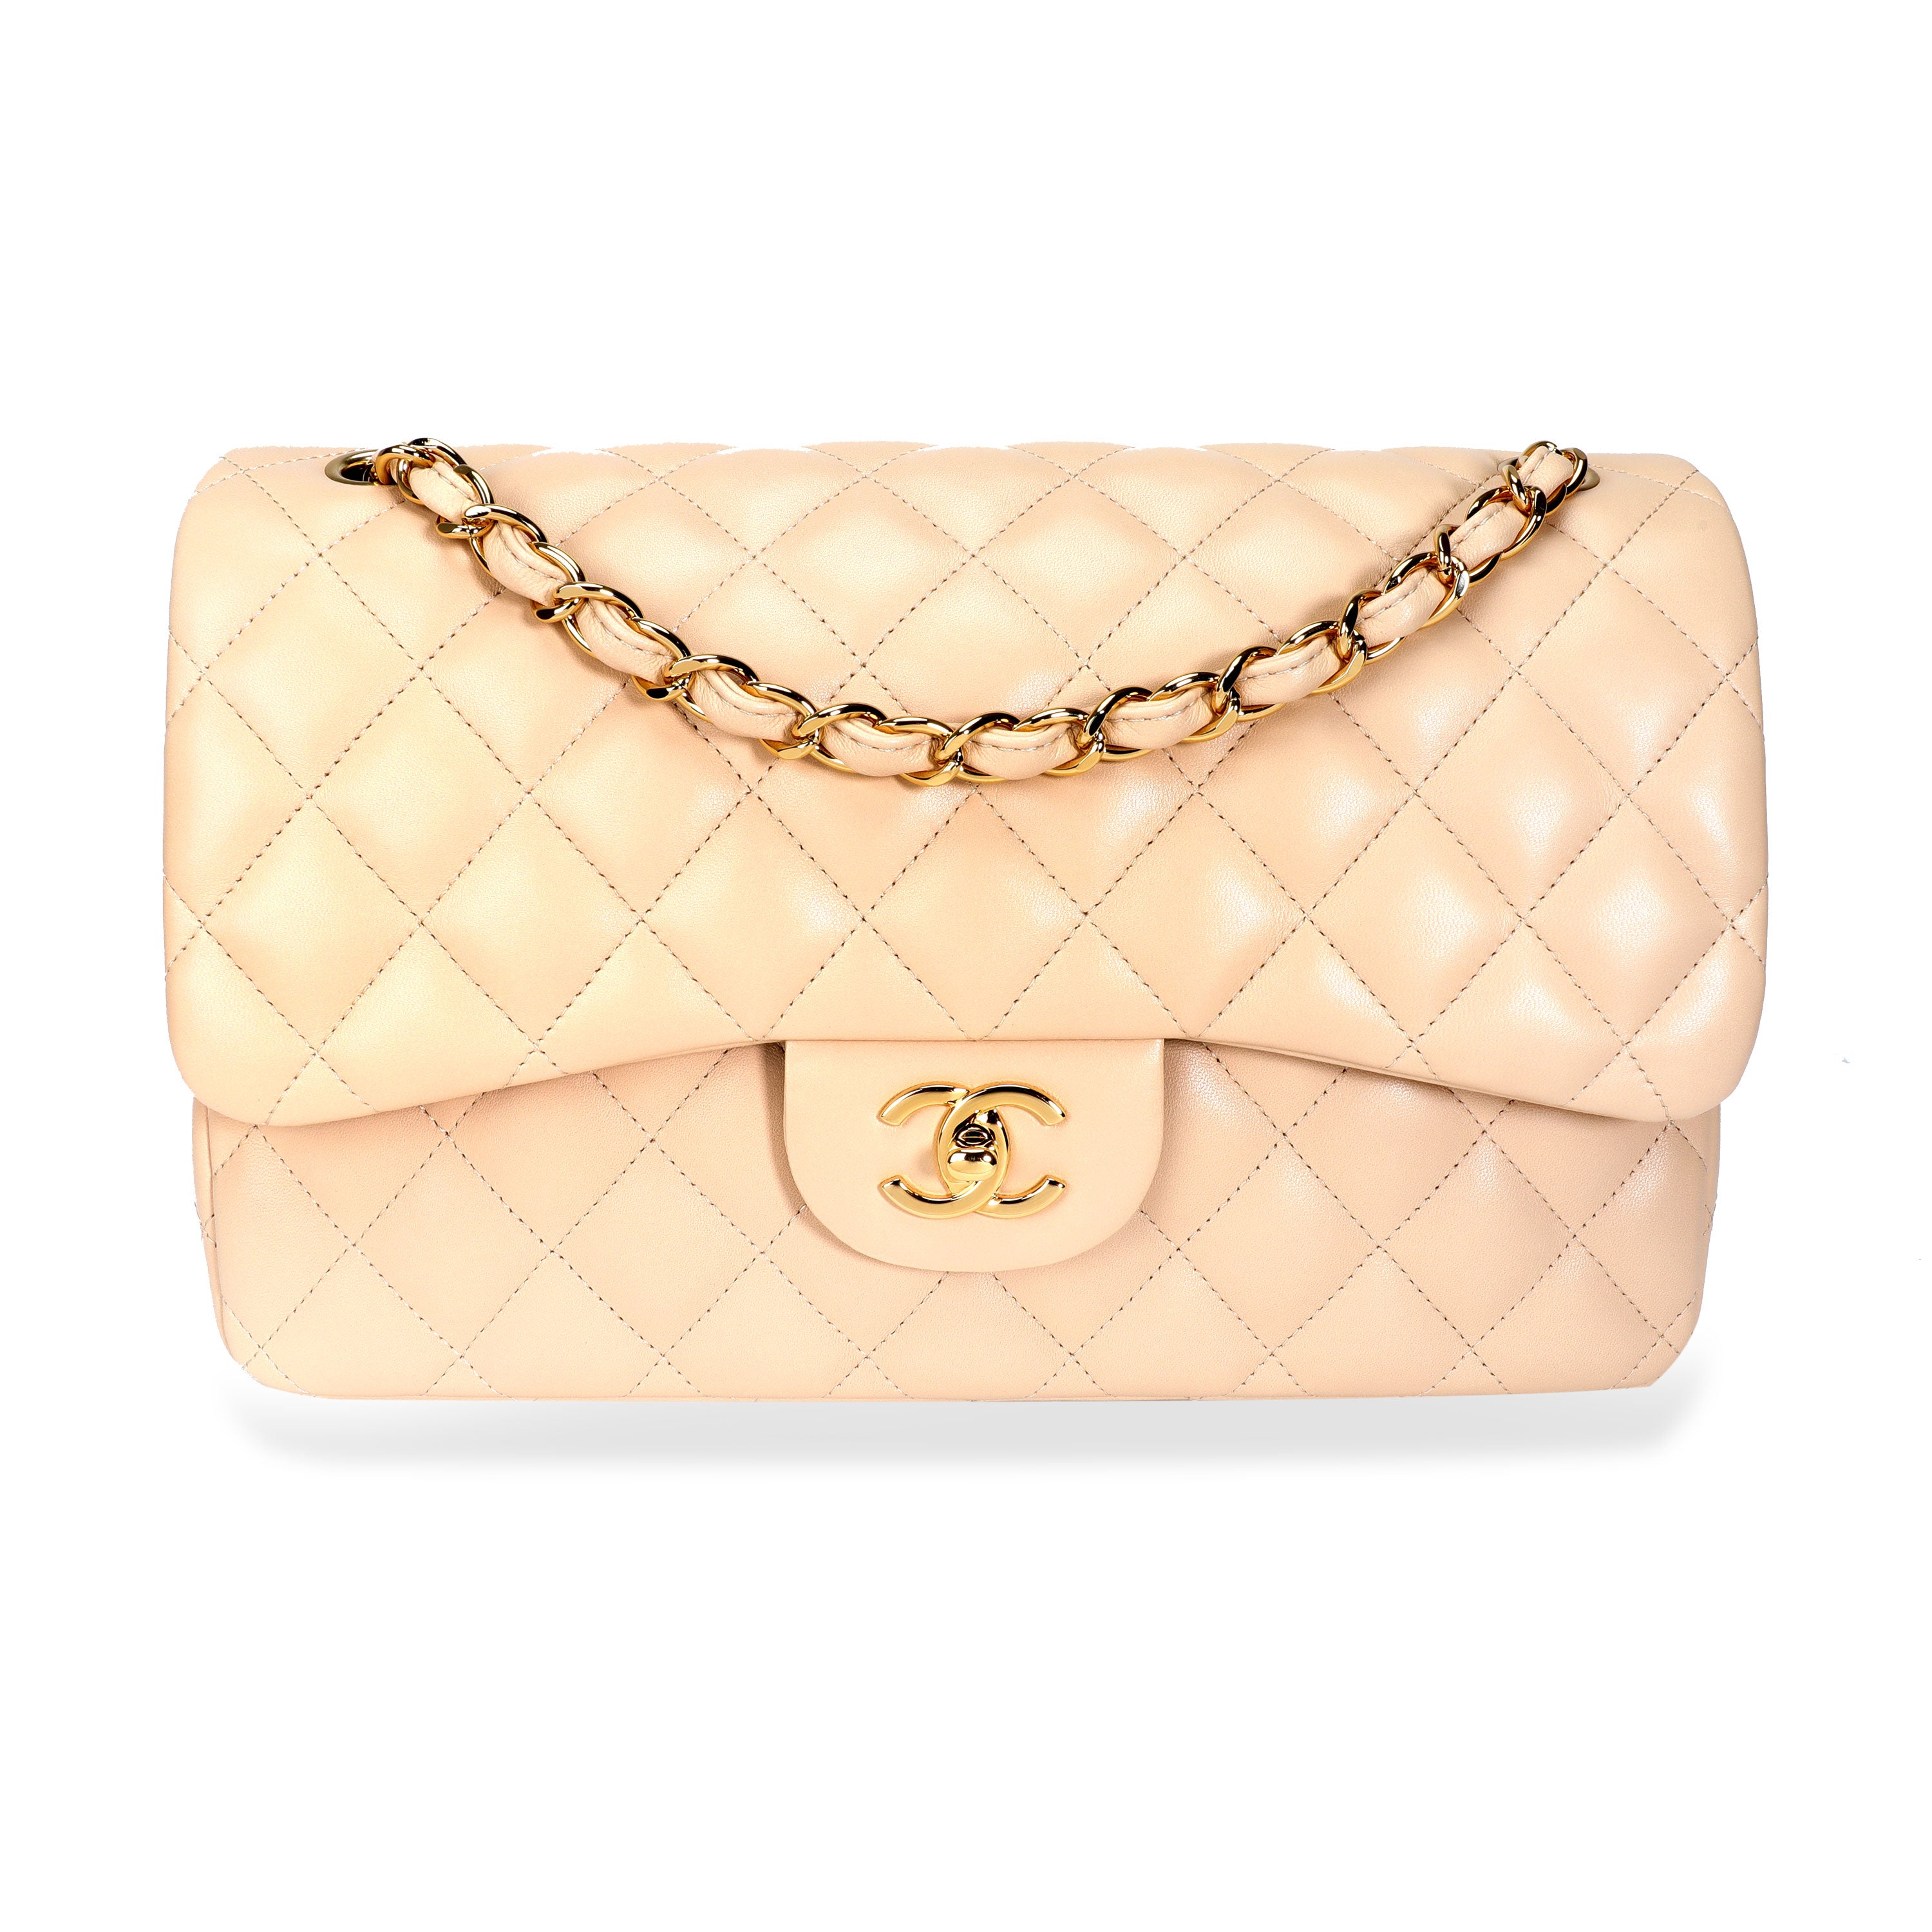 Chanel Light Beige Lambskin Quilted Classic Jumbo Double Flap